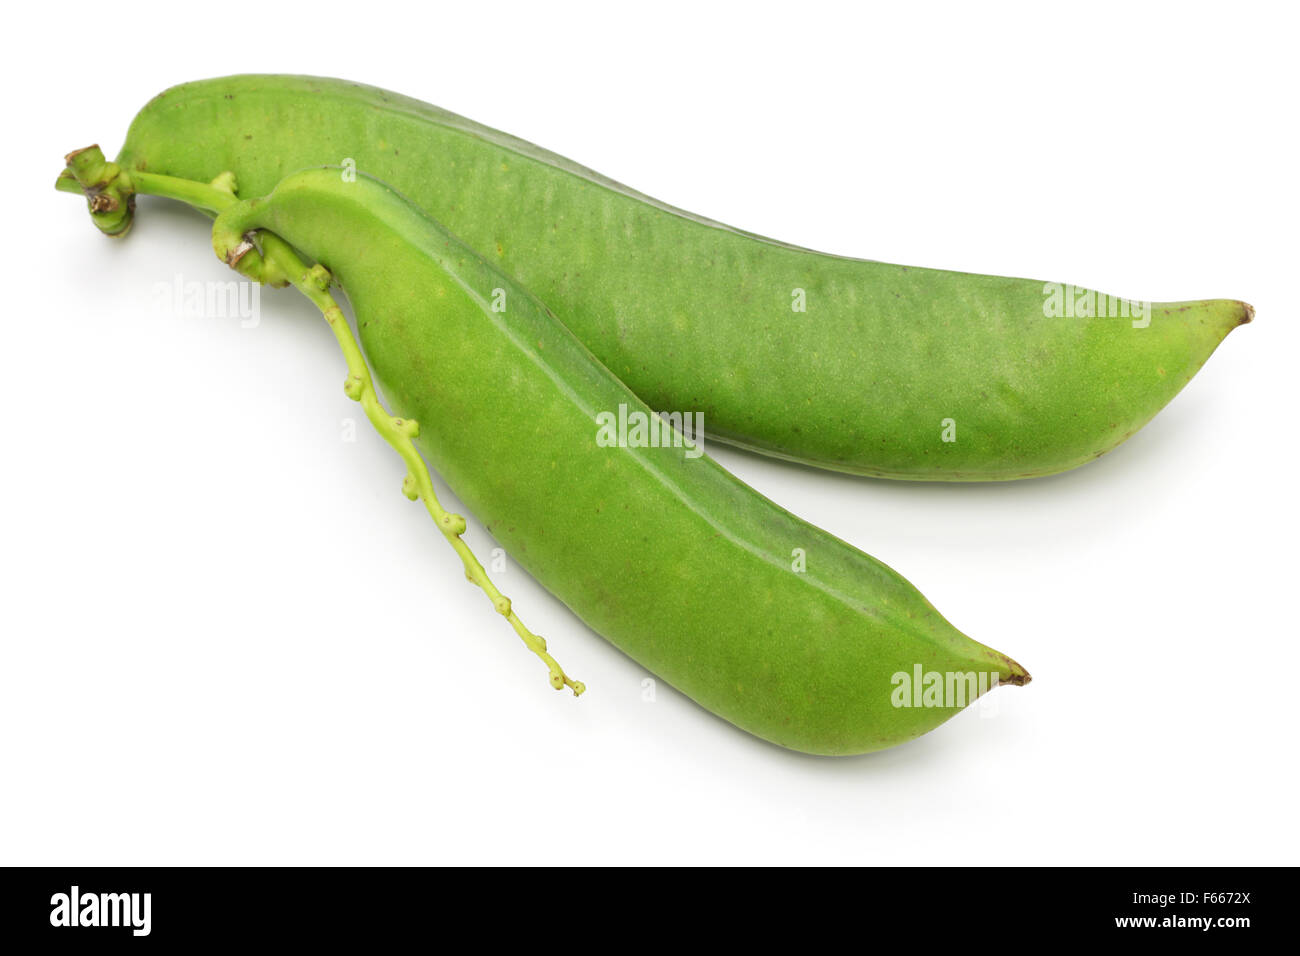 sword beans isolated on white background Stock Photo